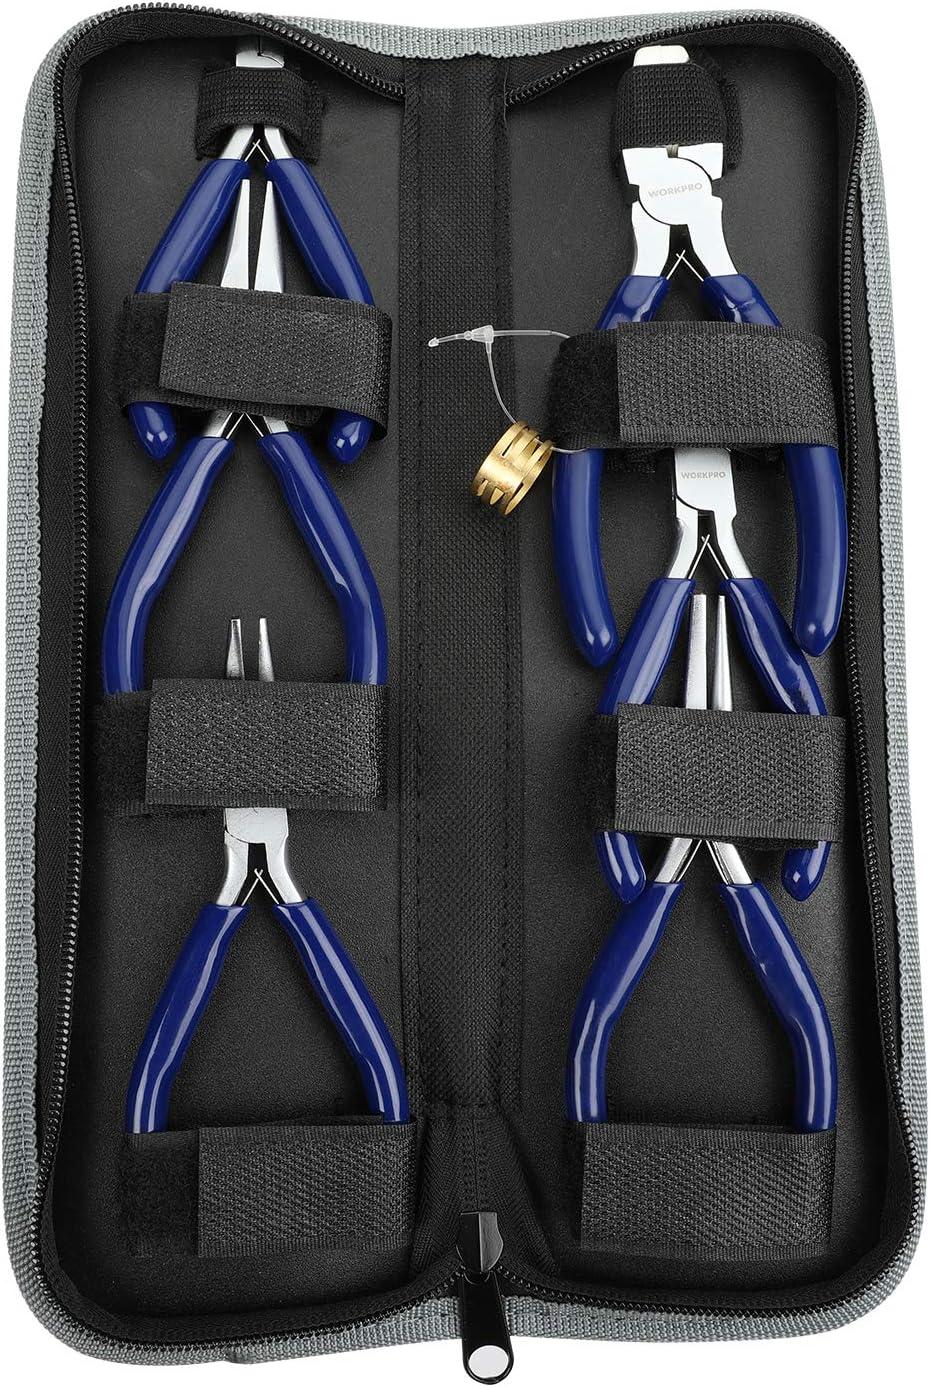 WORKPRO 7-Piece Jewelers Pliers Set Jewelry Making Tools Kit with Easy  Carrying Pouch (Blue)